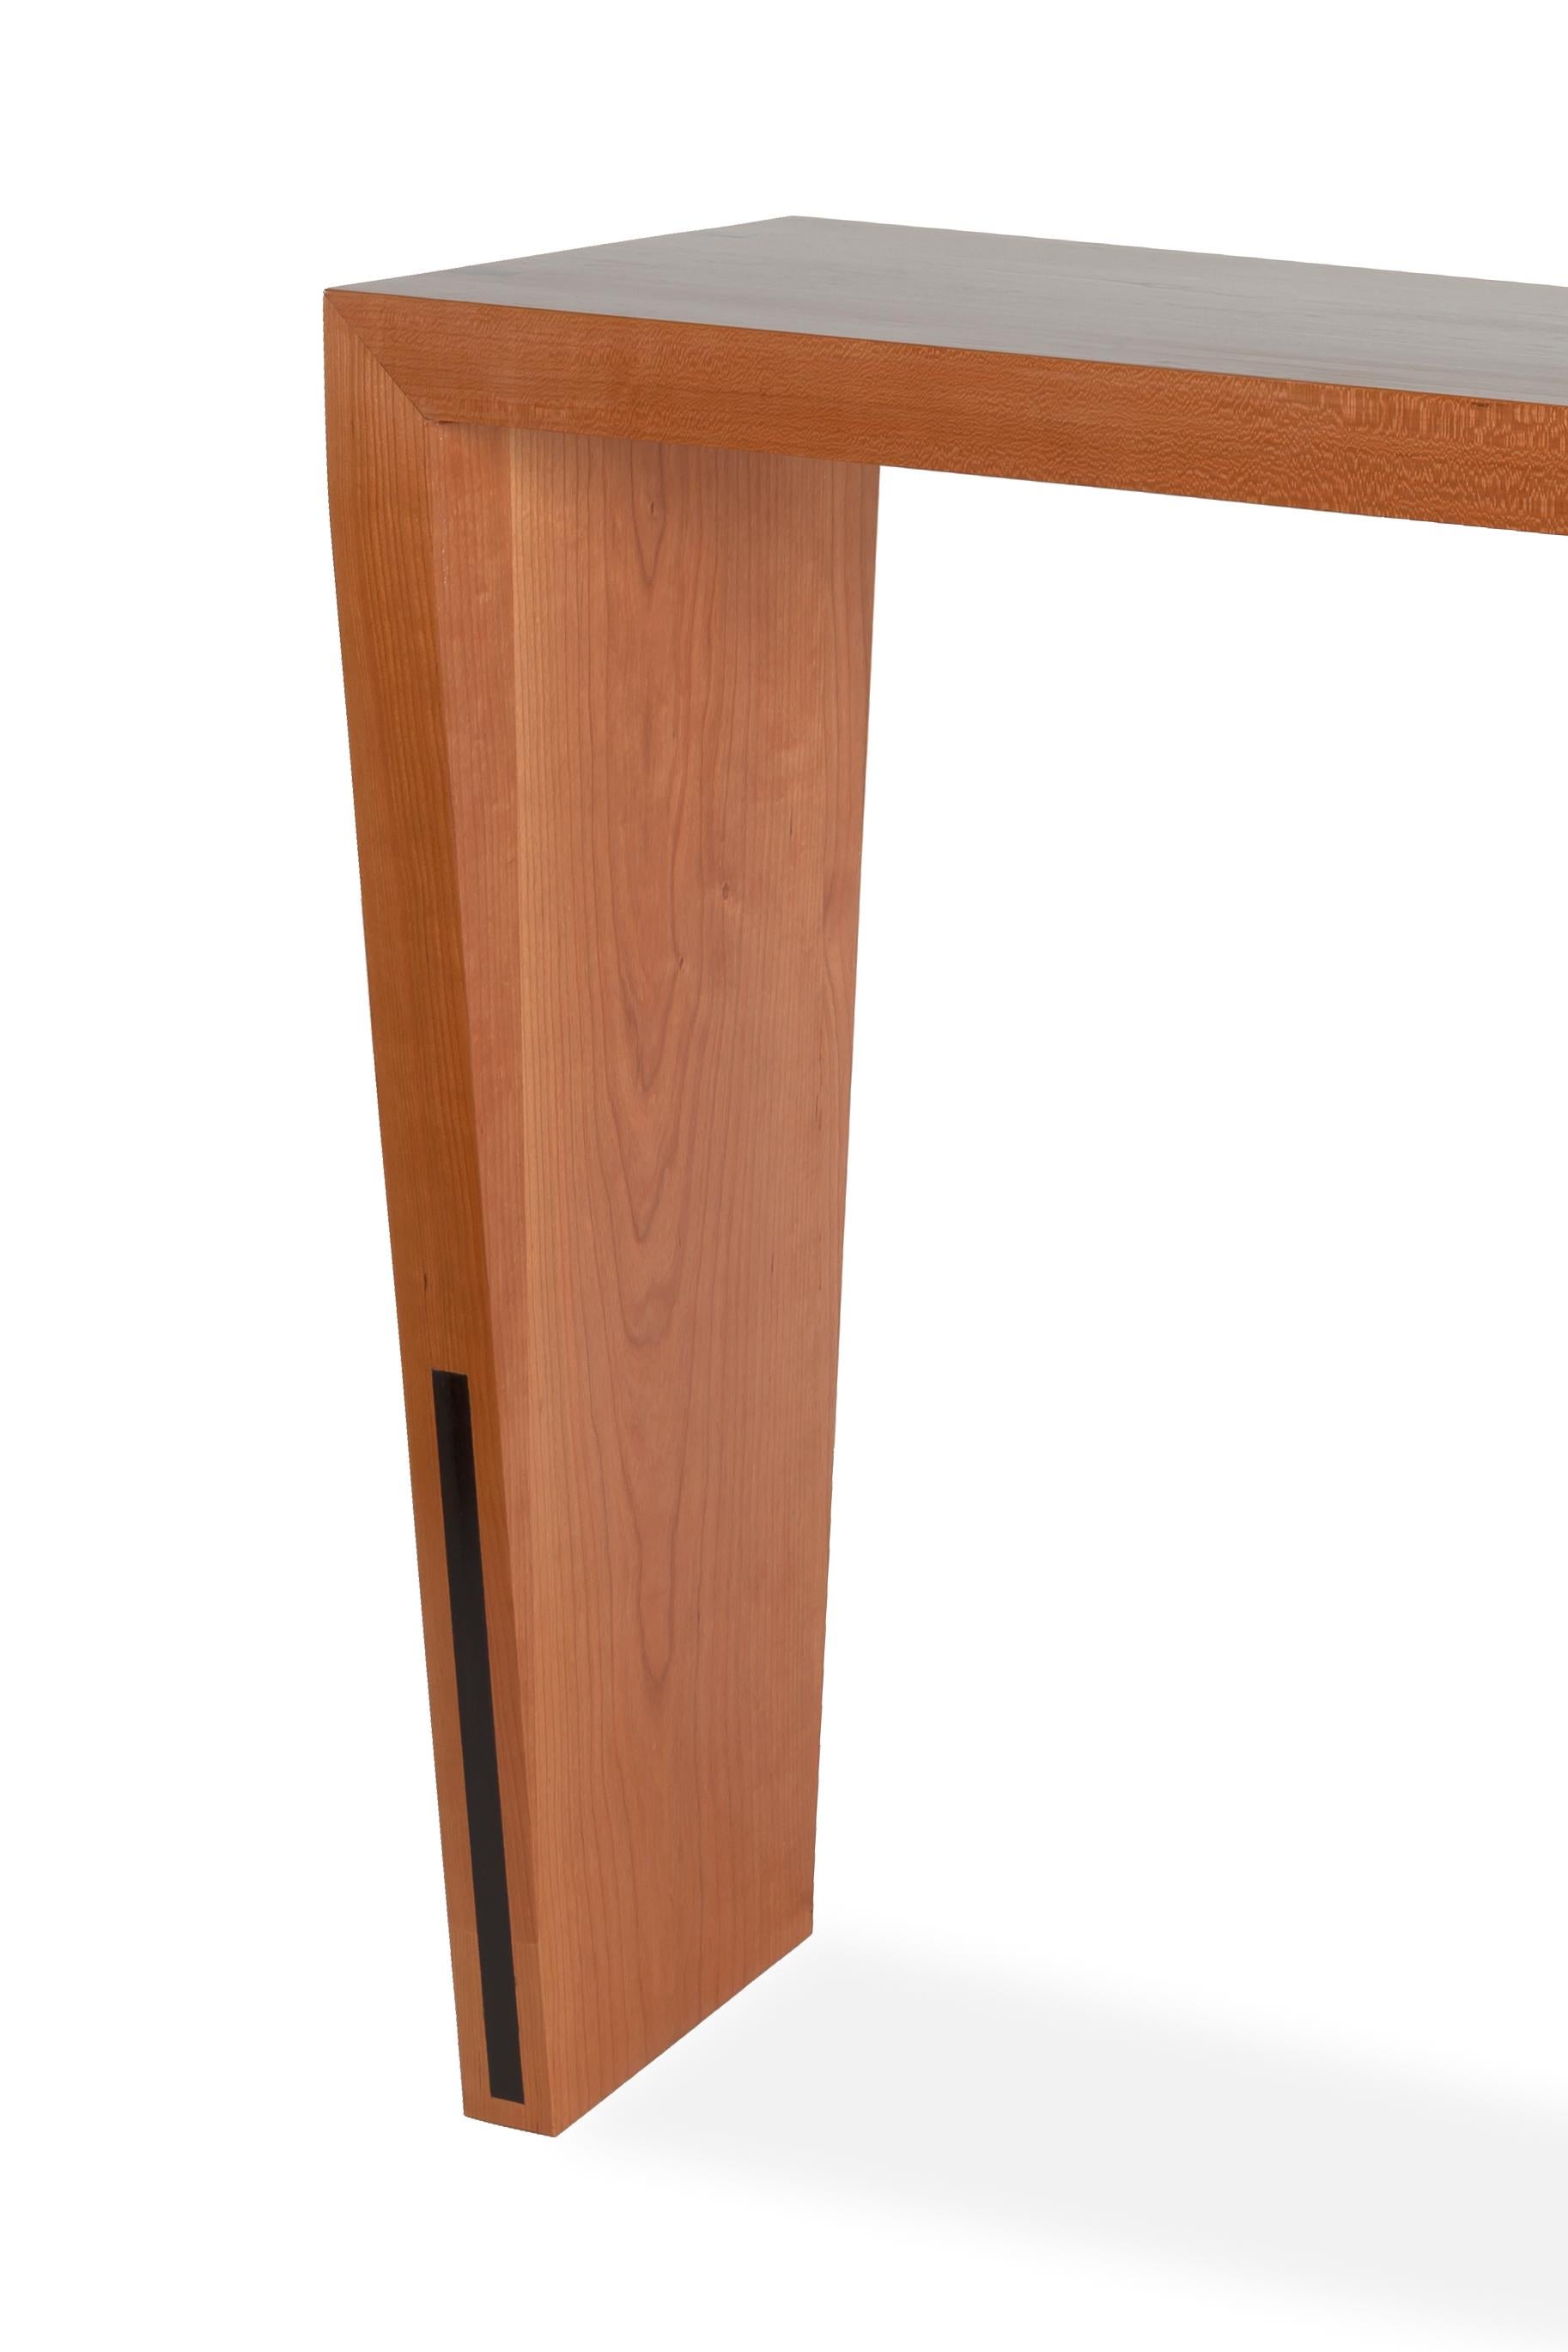 American Contemporary Hardwood Waterfall Console Table